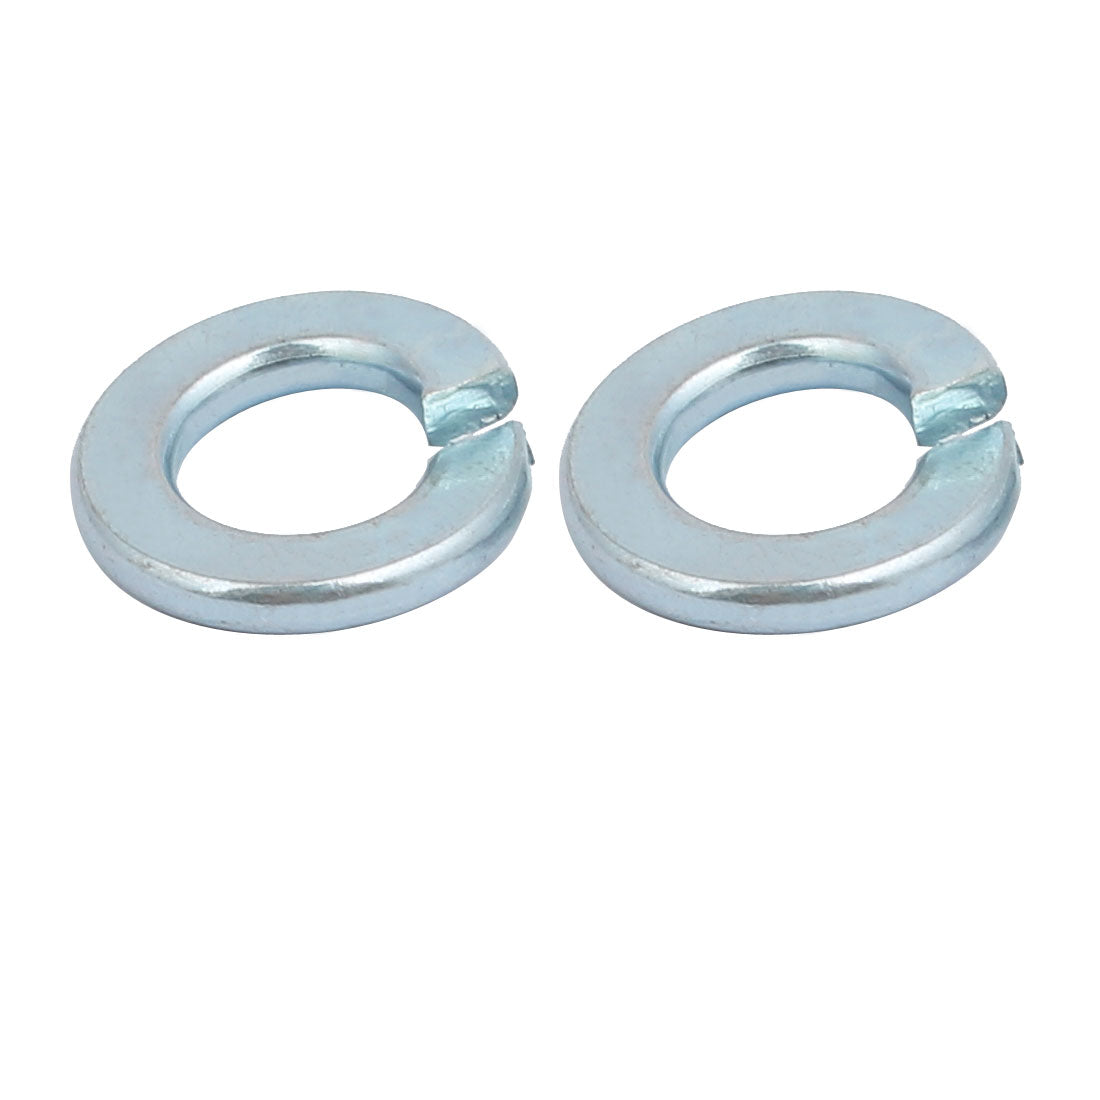 uxcell Uxcell 100pcs 1/4-inch Inner Dia Carbon Steel Split Lock Spring Washer Silver Blue